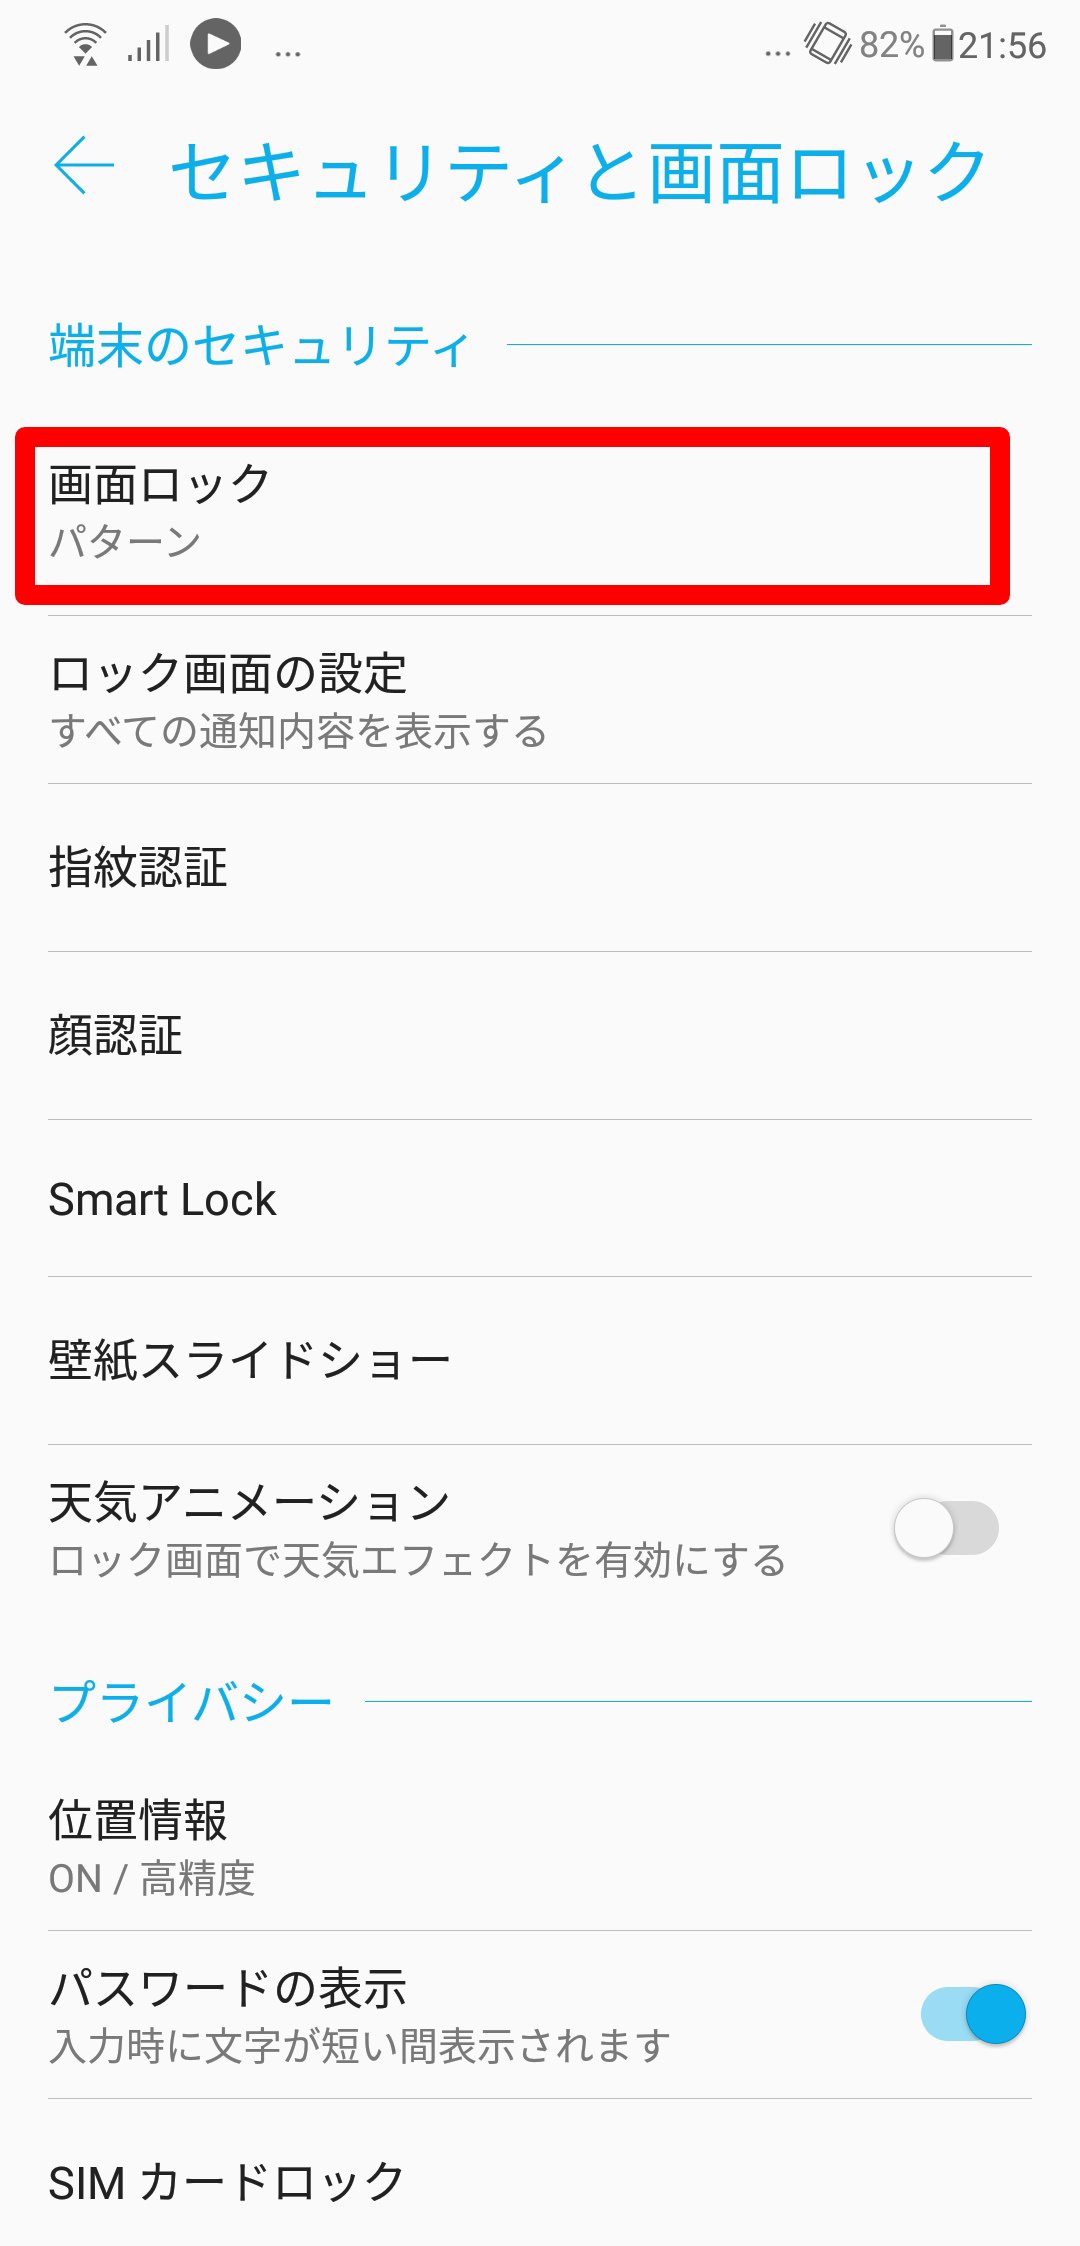 Androidスマホでのkindle読み上げ スリープモード中でも読み上げが止まらない方法 Android8 0 Aboutbook 読書共有記